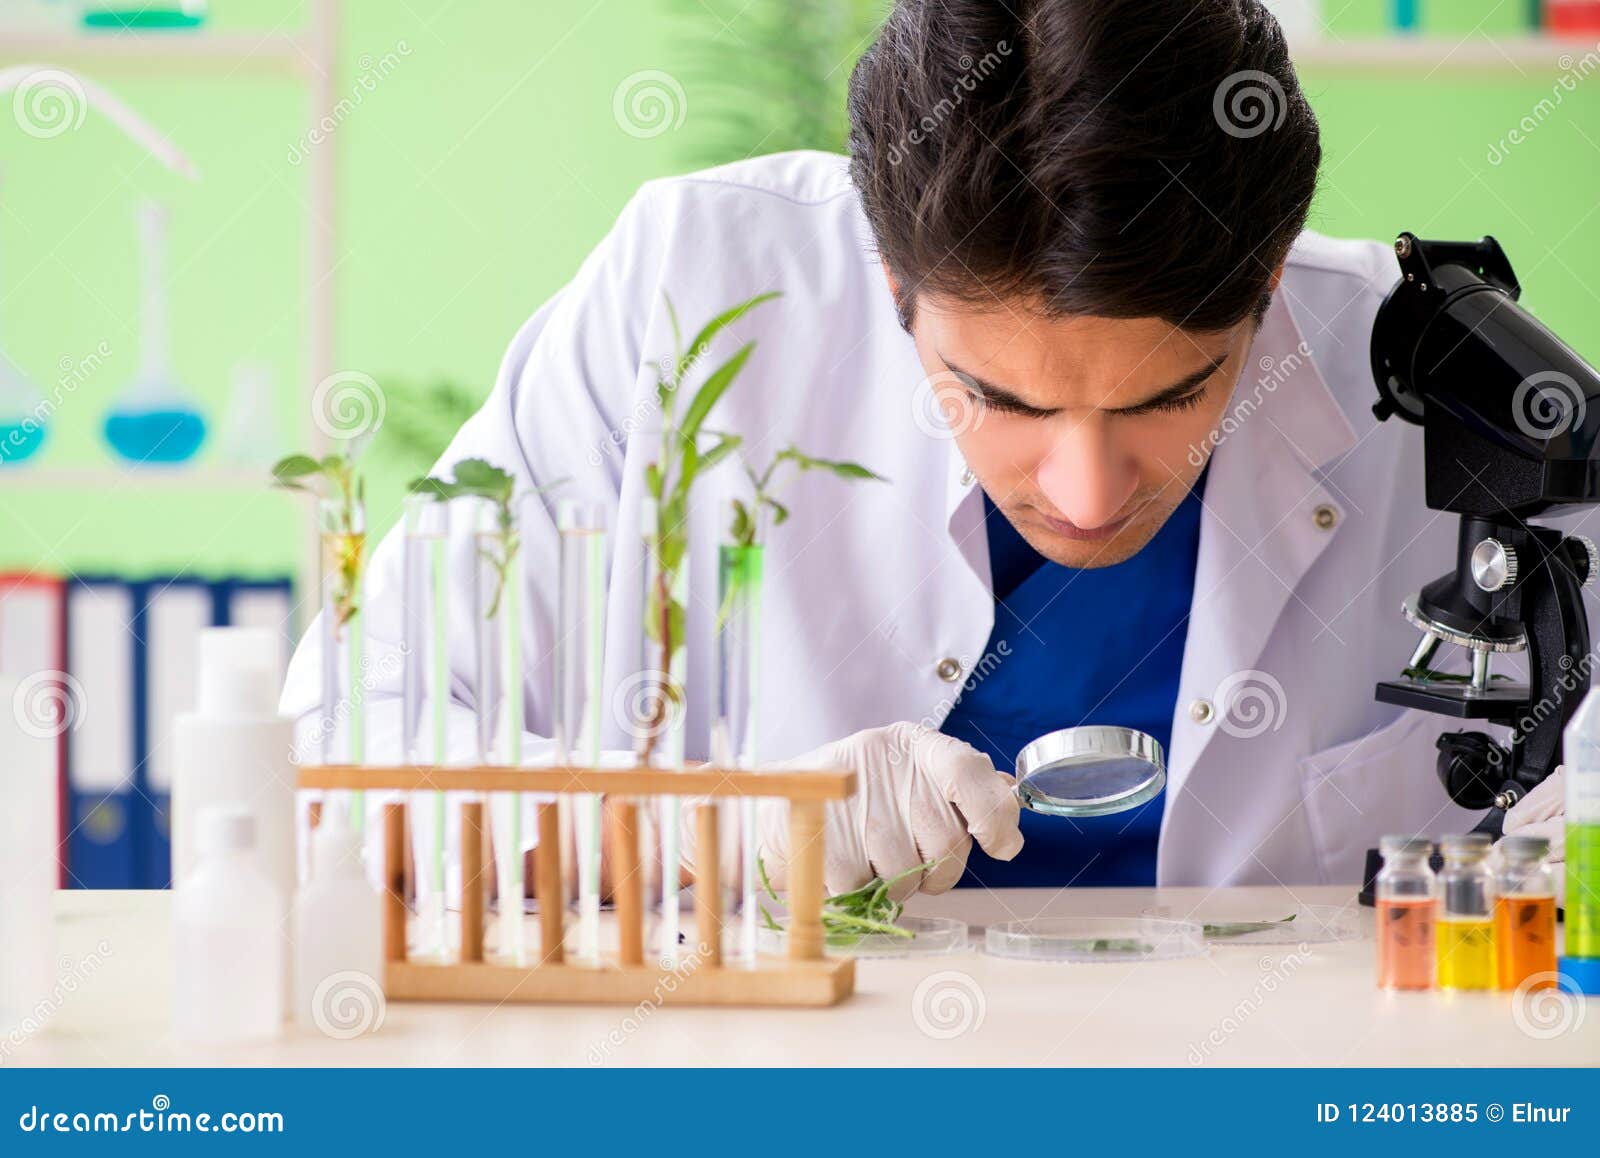 The Young Biotechnology Scientist Chemist Working in Lab Stock Image